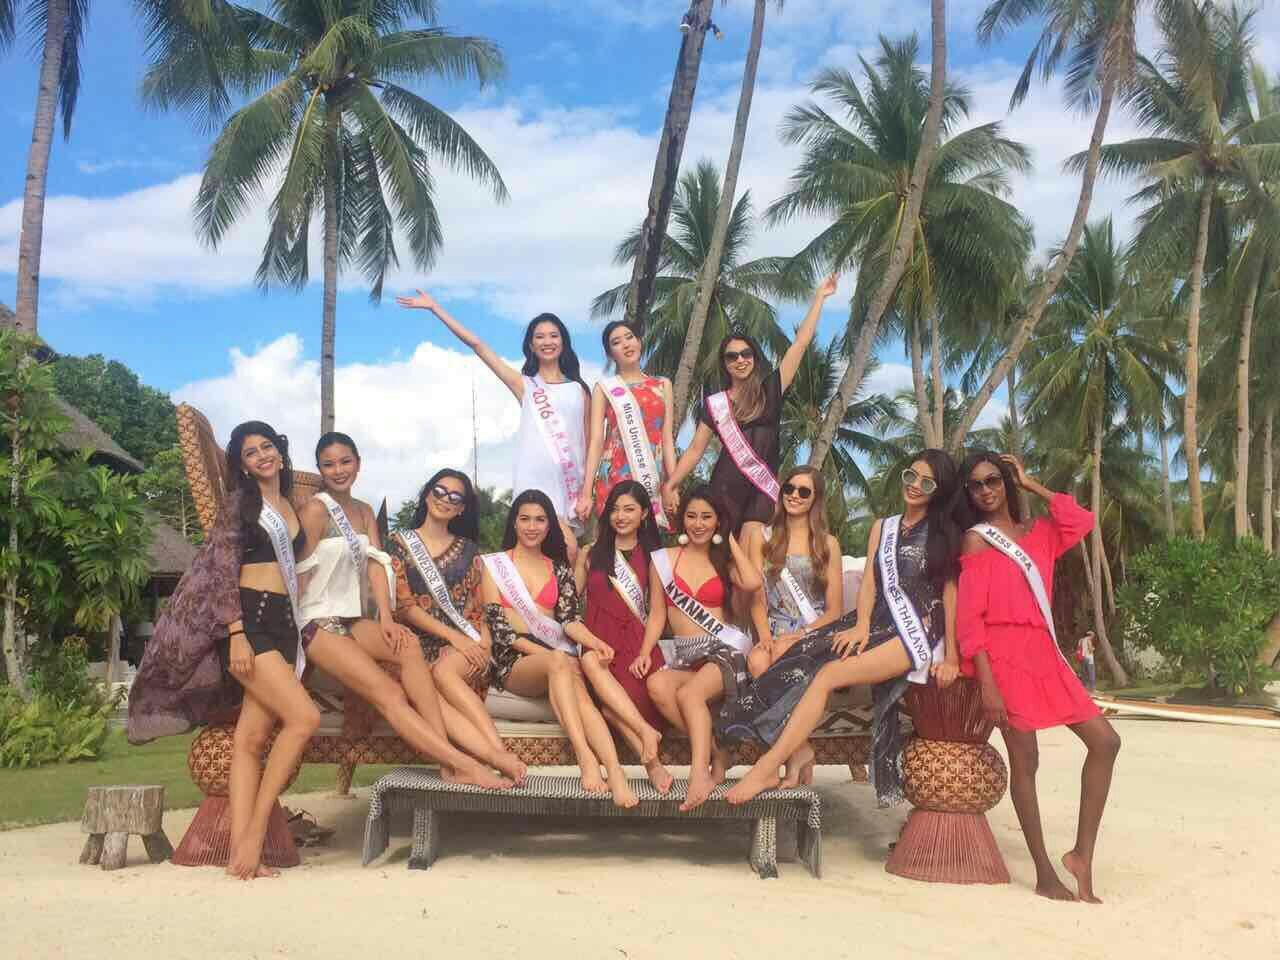 DAVAO FASHION SHOW. The Davao cultural fashion show, featuring the Miss Universe candidates, will push through in January, confirms the Department of Tourism. This, after the DOT ironed the issue out with the Davao Fashion Design Council. File photo shows the candidates during a recent trip to Siargao. Photo courtesy of the Department of Tourism  